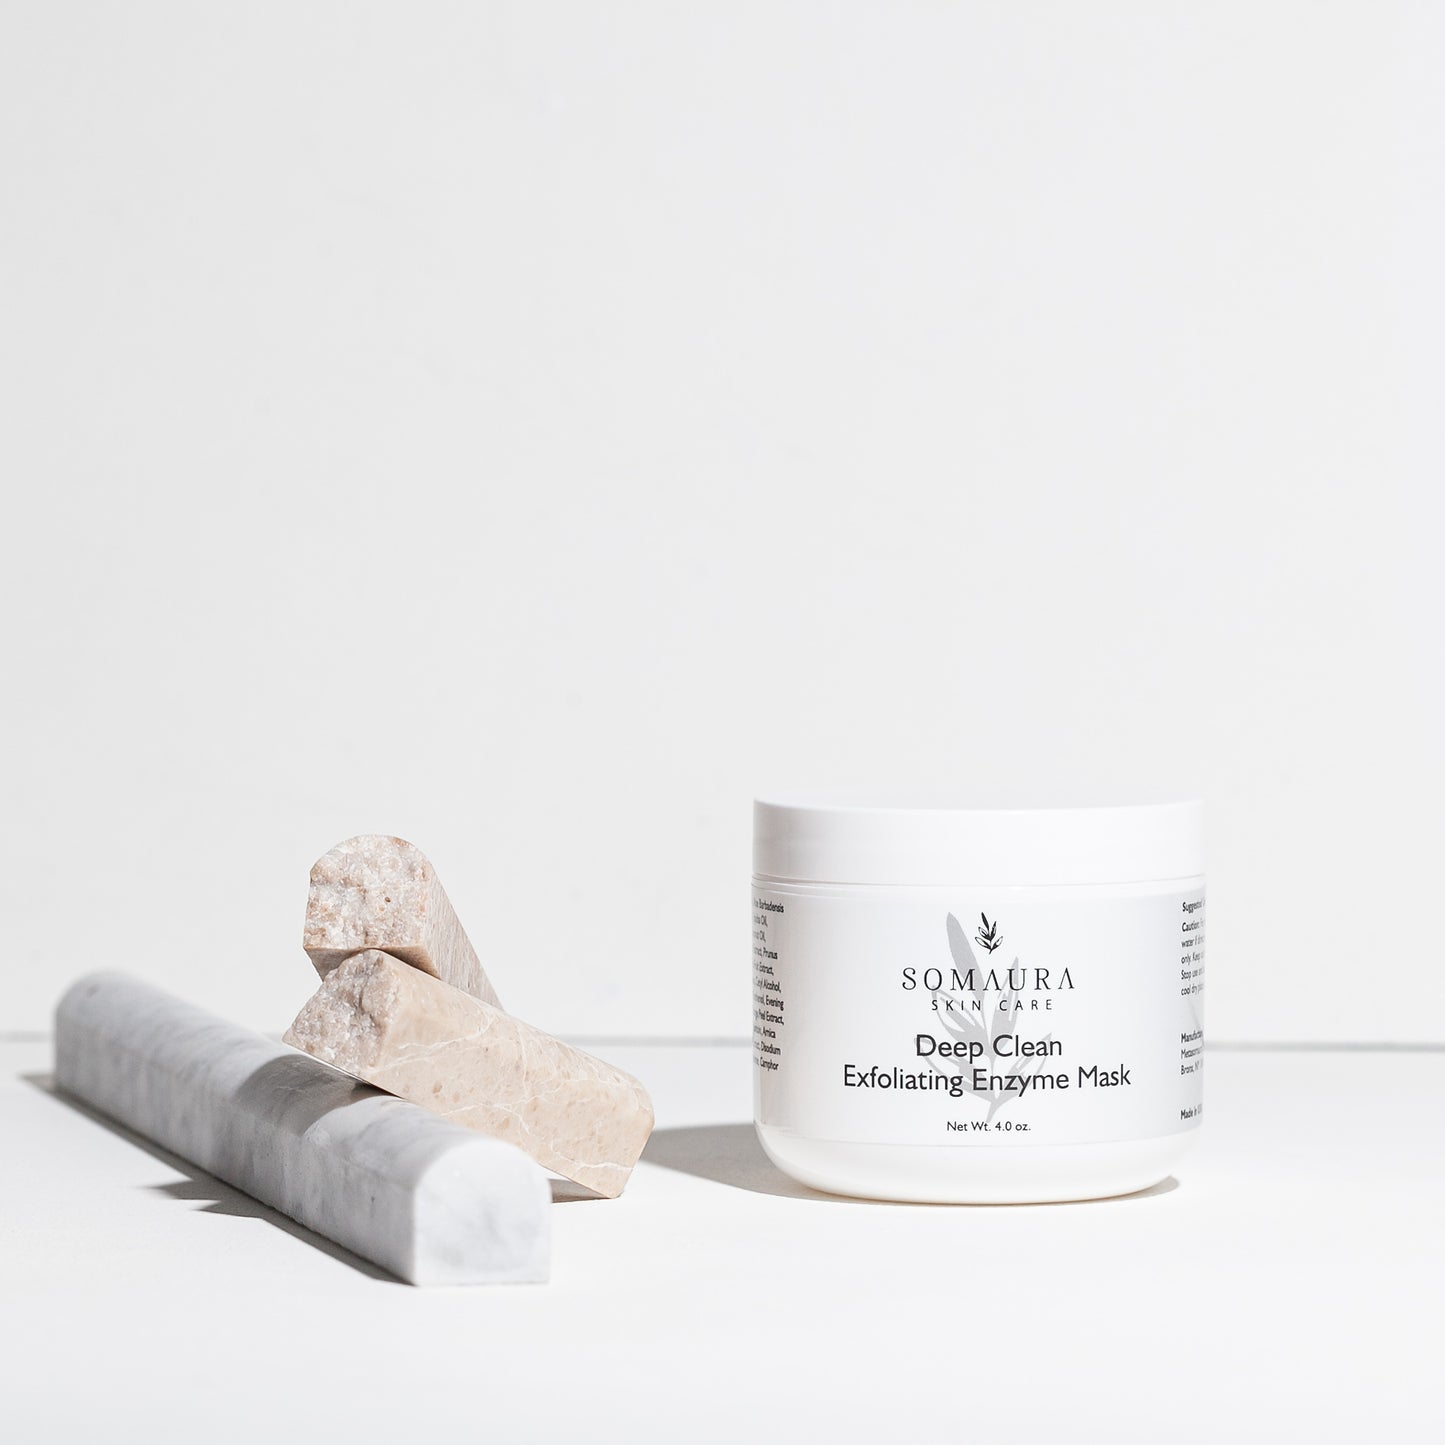 Deep Clean Exfoliating Enzyme Mask